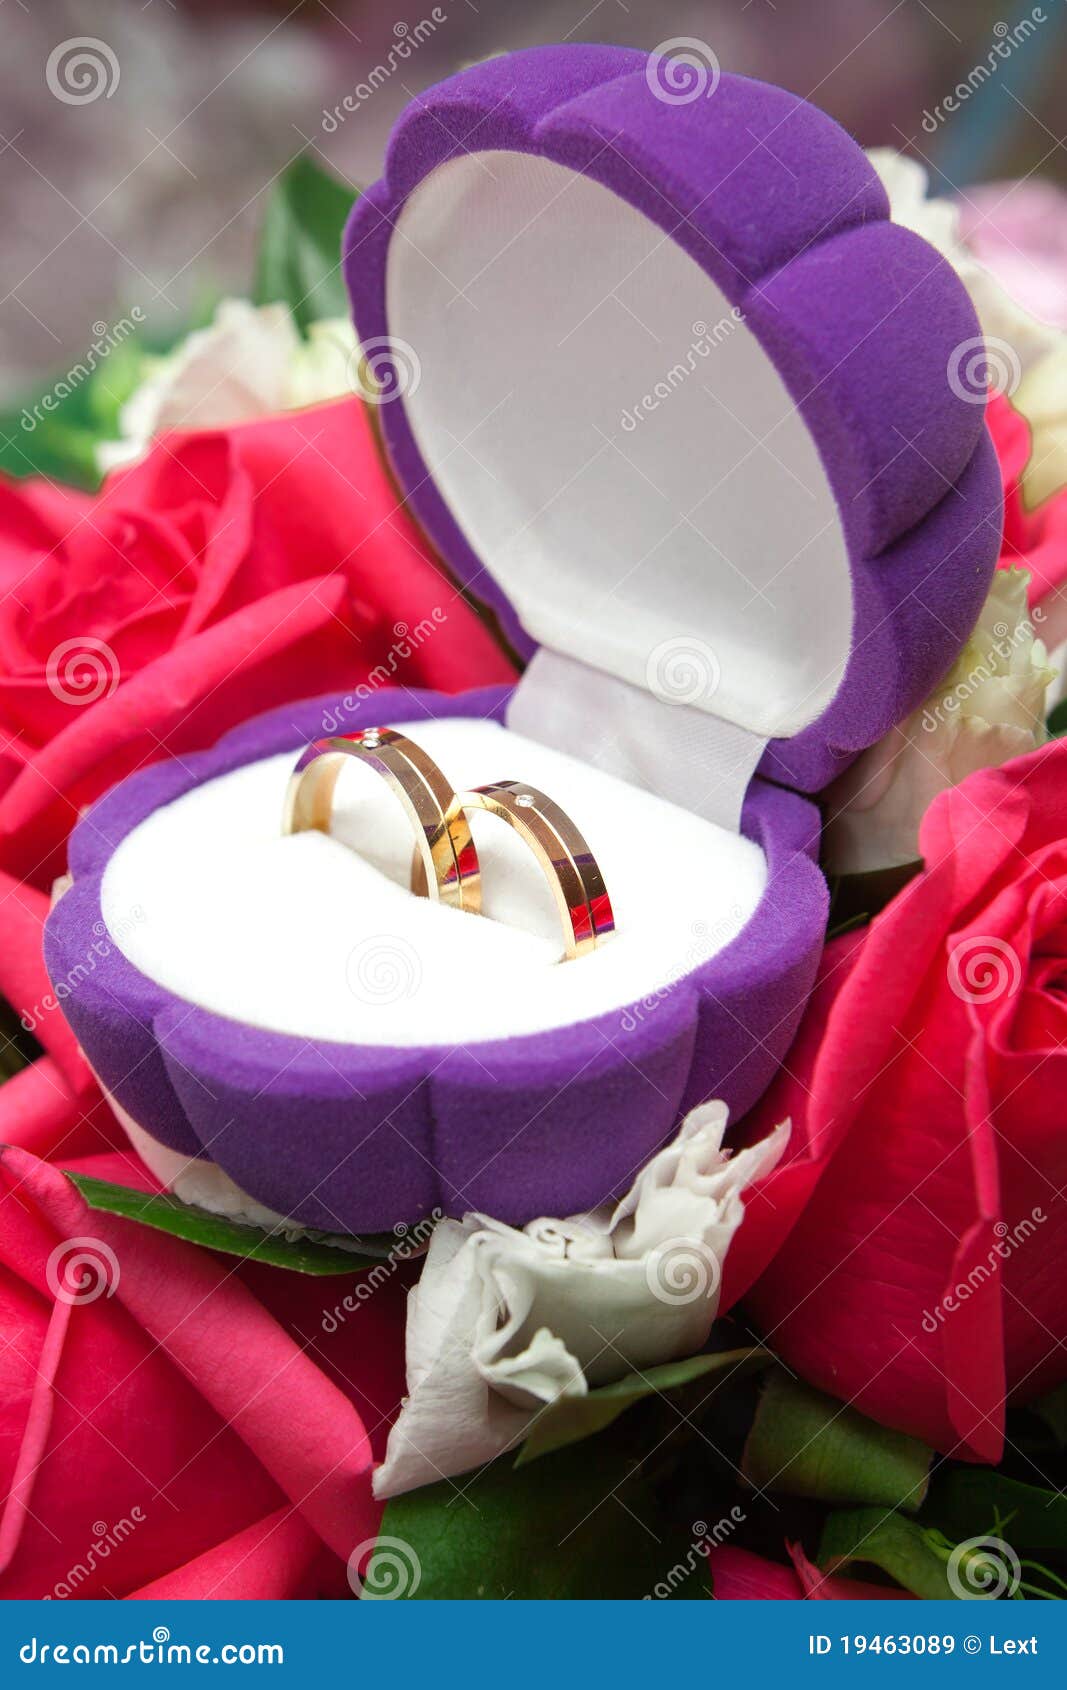 Wedding rings in a box stock image. Image of celebration - 19463089